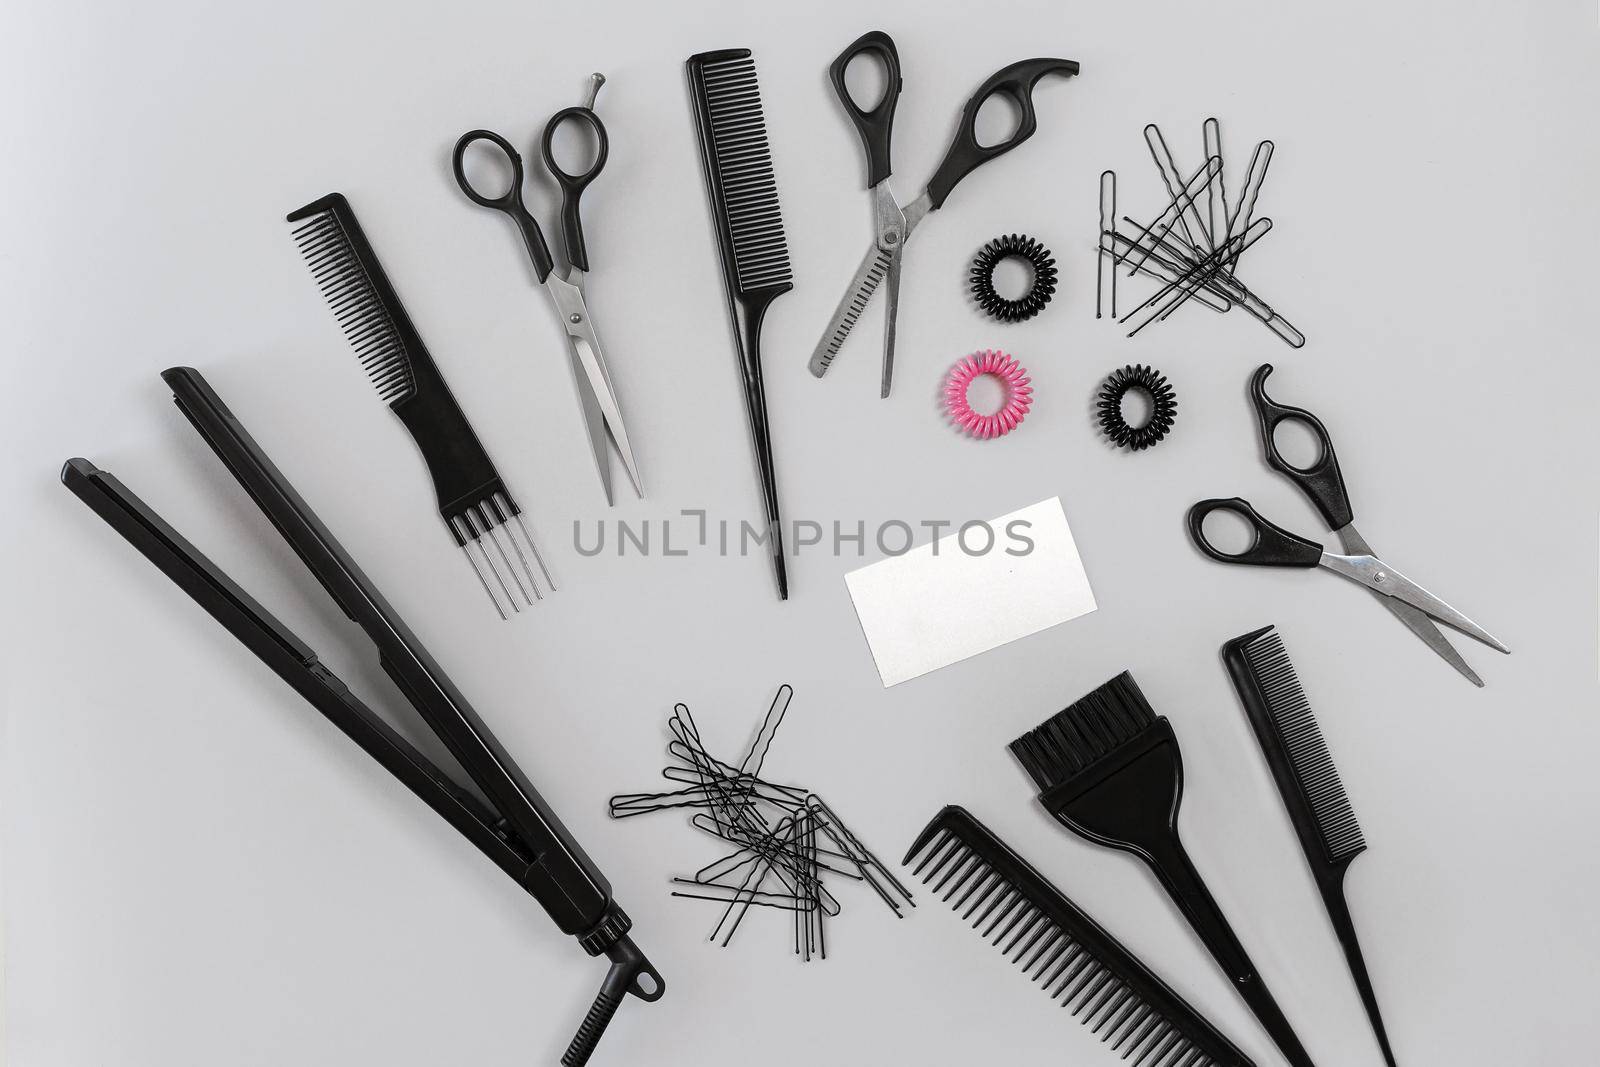 Hairdresser set with various accessories on gray background. Top view. Still life. Flat lay.